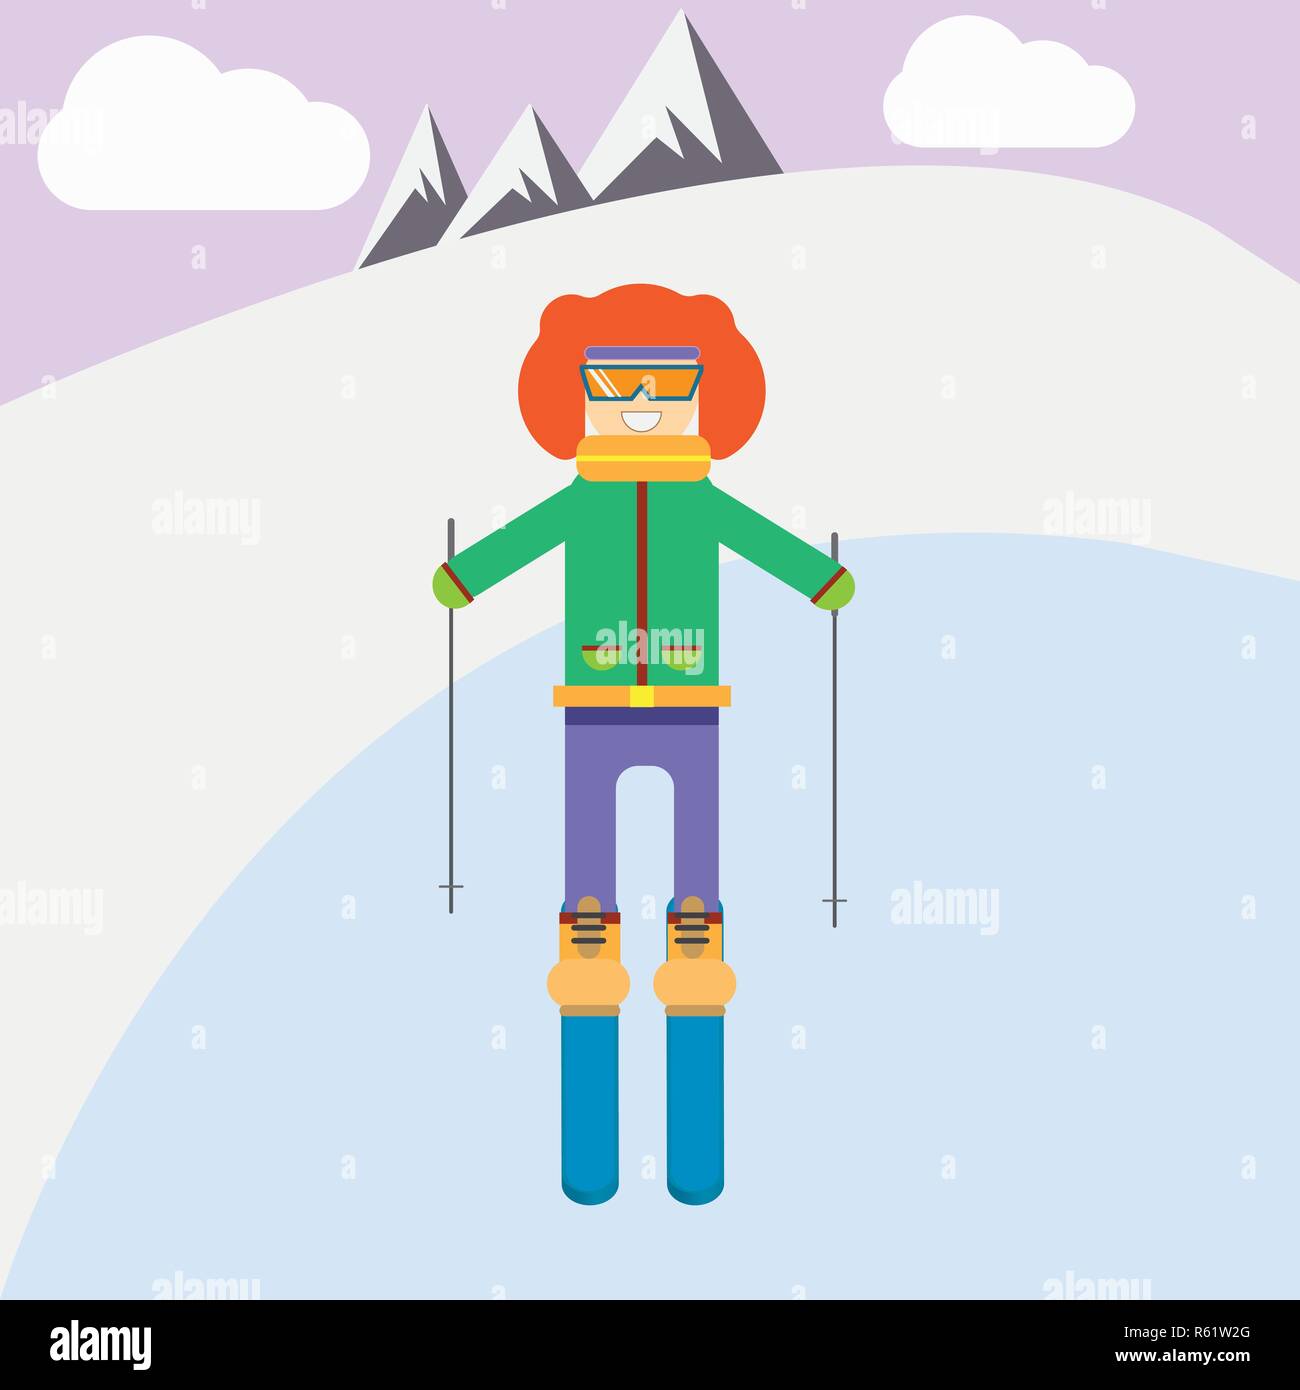 Young woman downhill skiing winter activity vector illustration design. Stock Vector